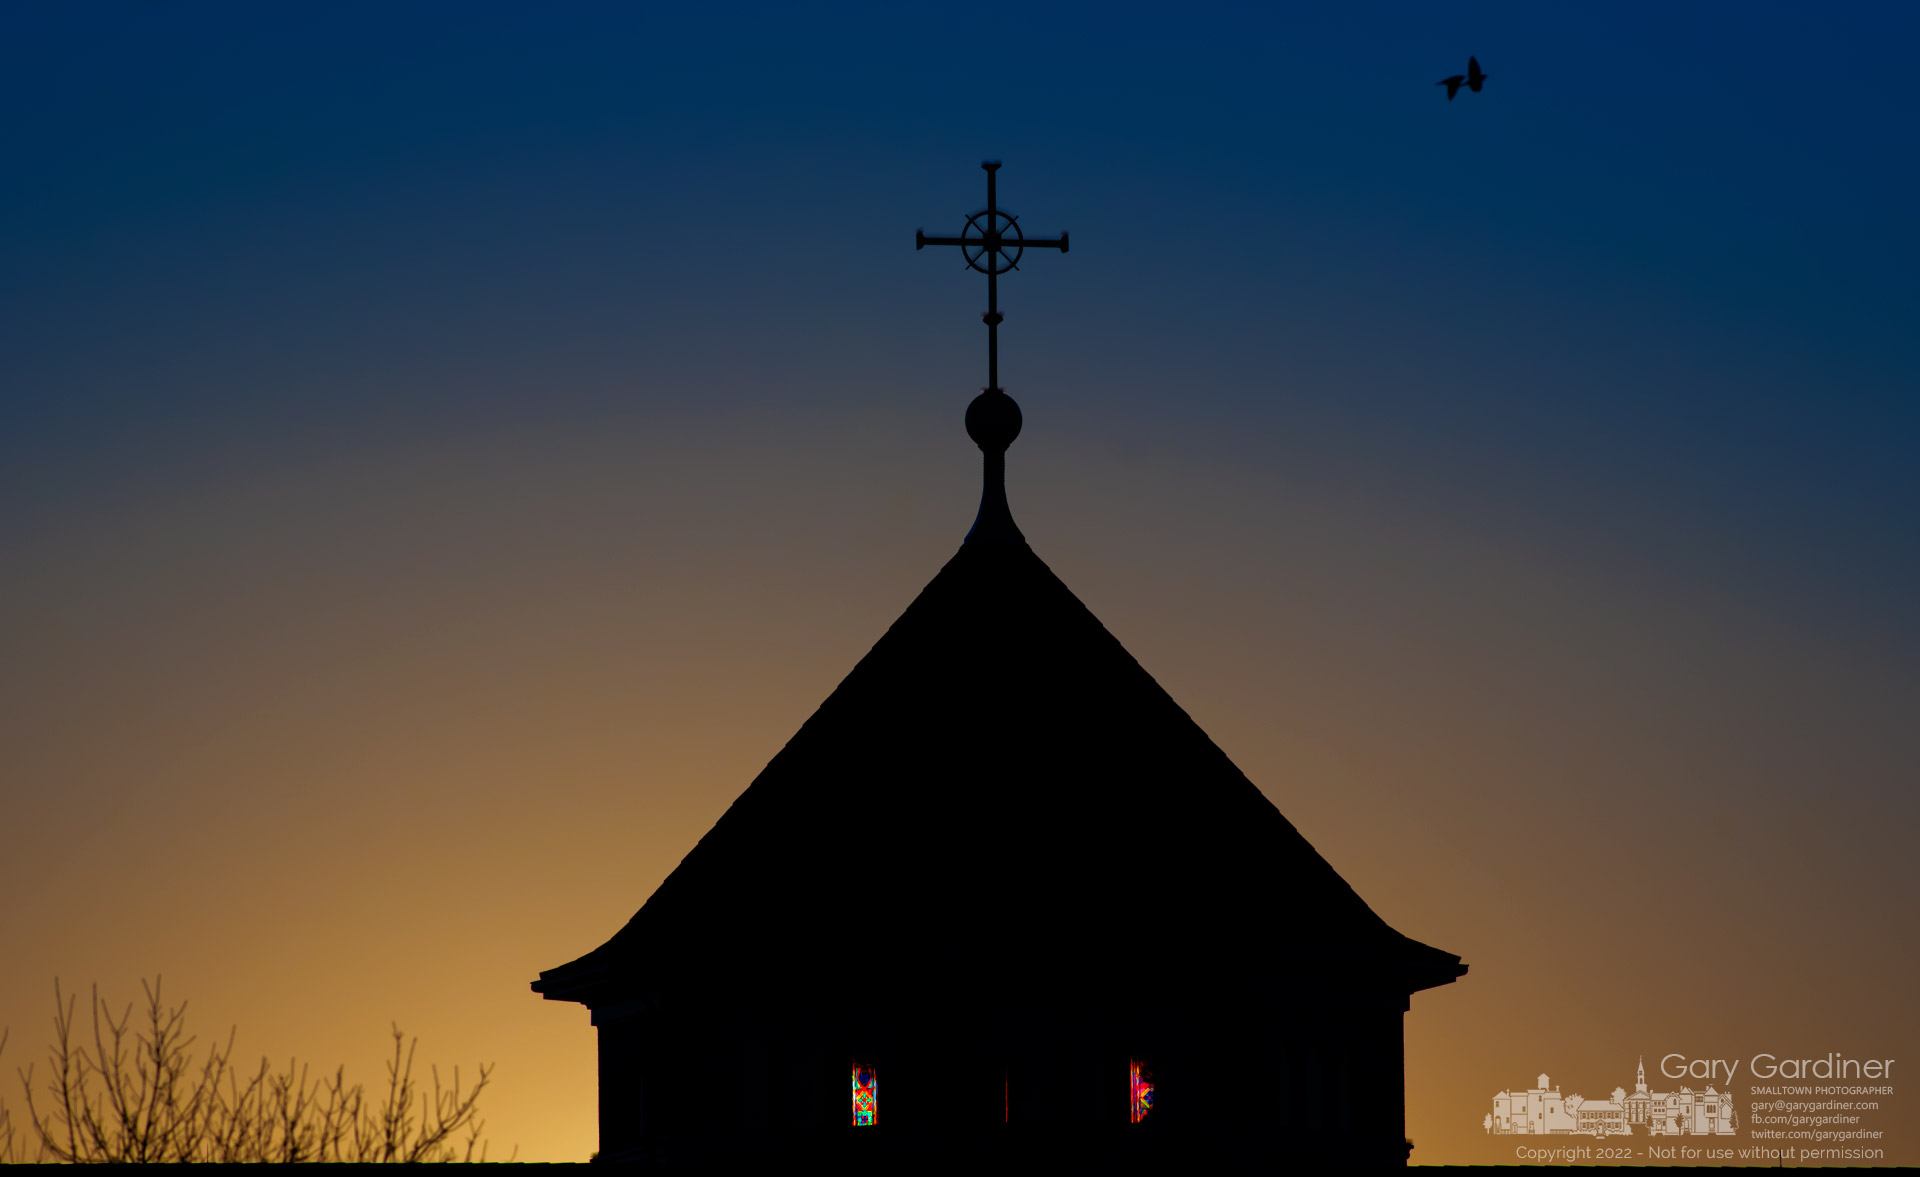 The morning sun rises behind the St. Paul the Apostle Catholic Church steeple illuminating a few of the stained glass windows. My Final Photo for Feb. 20, 2022.